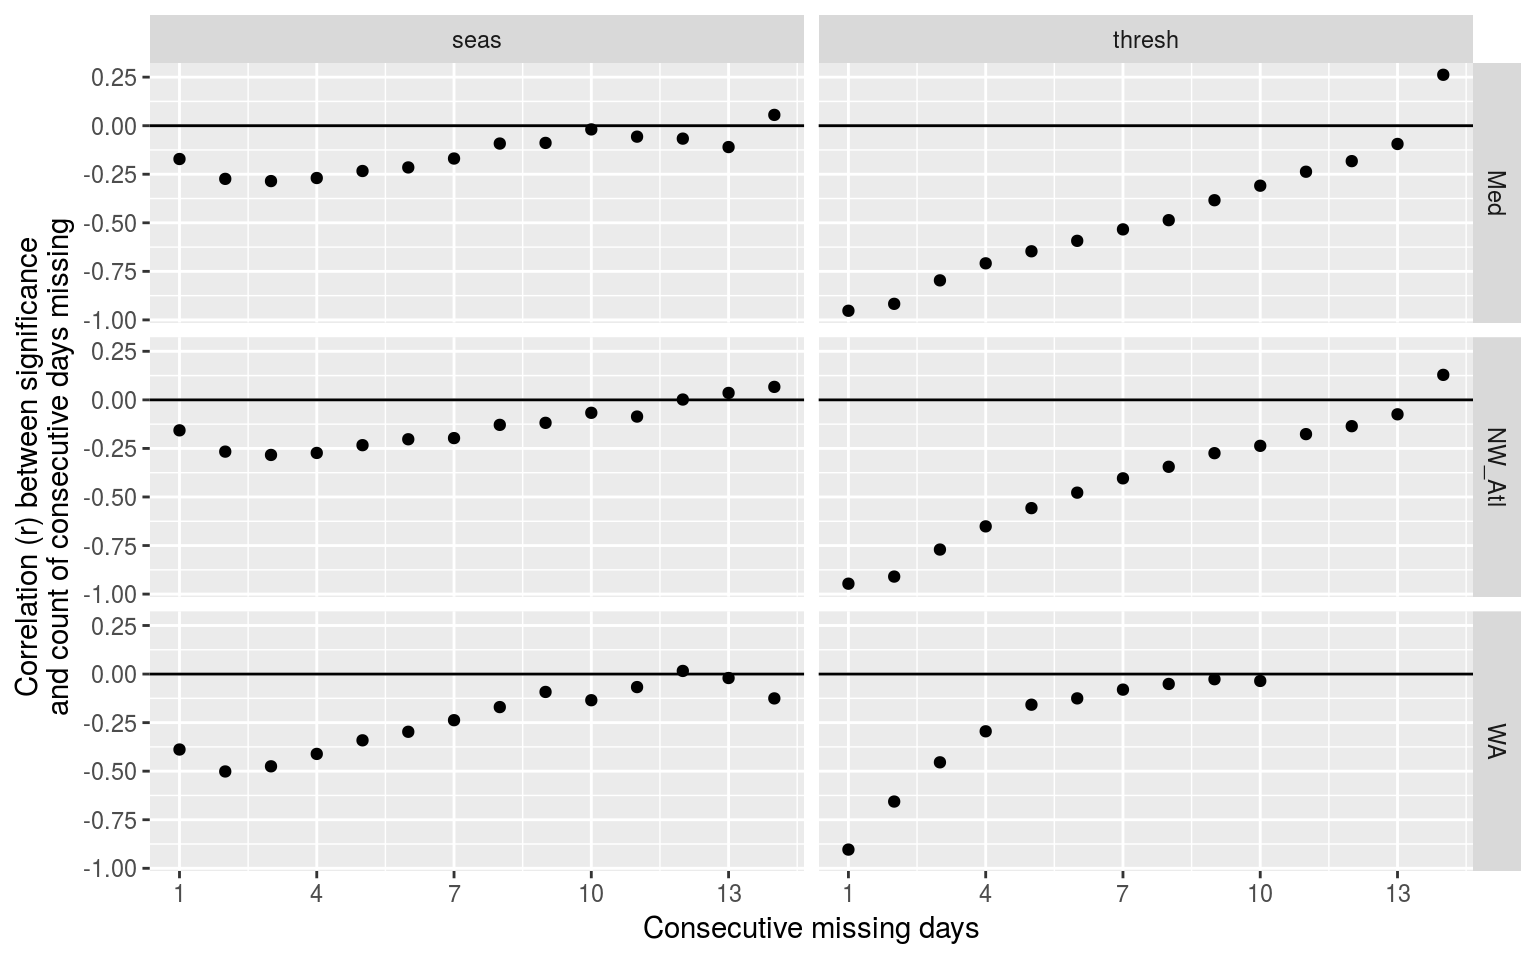 Dot plot showing the relationship between number of consecutive missing days and the significant difference of that climatology as determined by KS tests. Consecutive missing days are a much better predictor for thresholds than for seasonal signals.